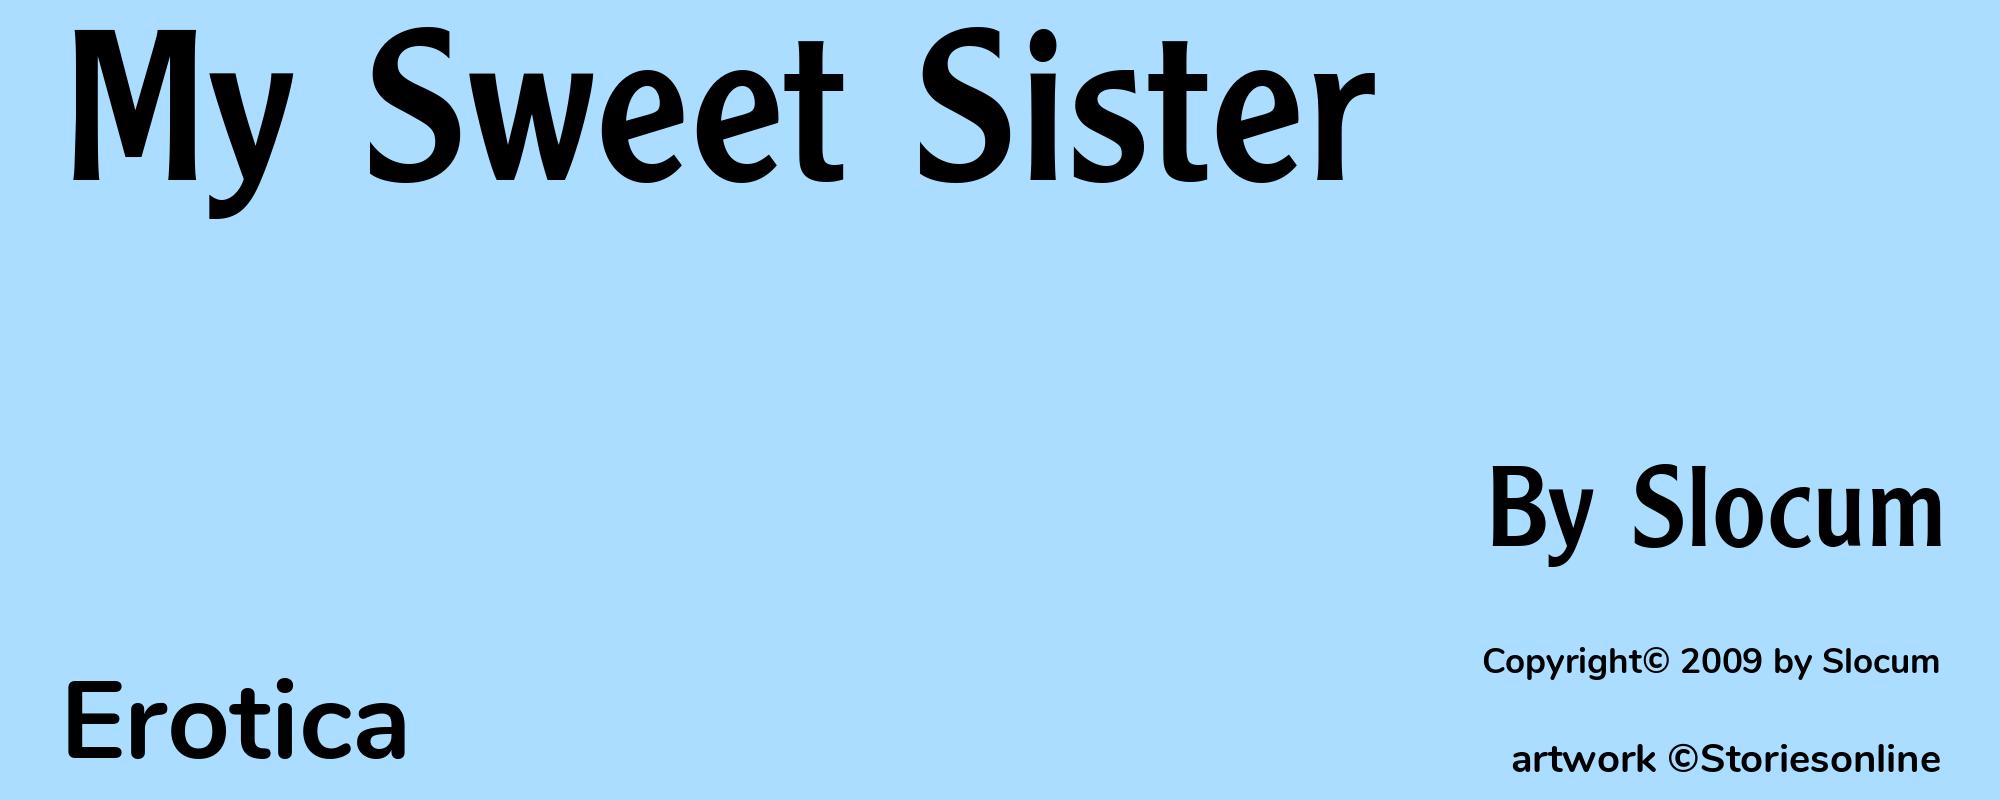 My Sweet Sister - Cover